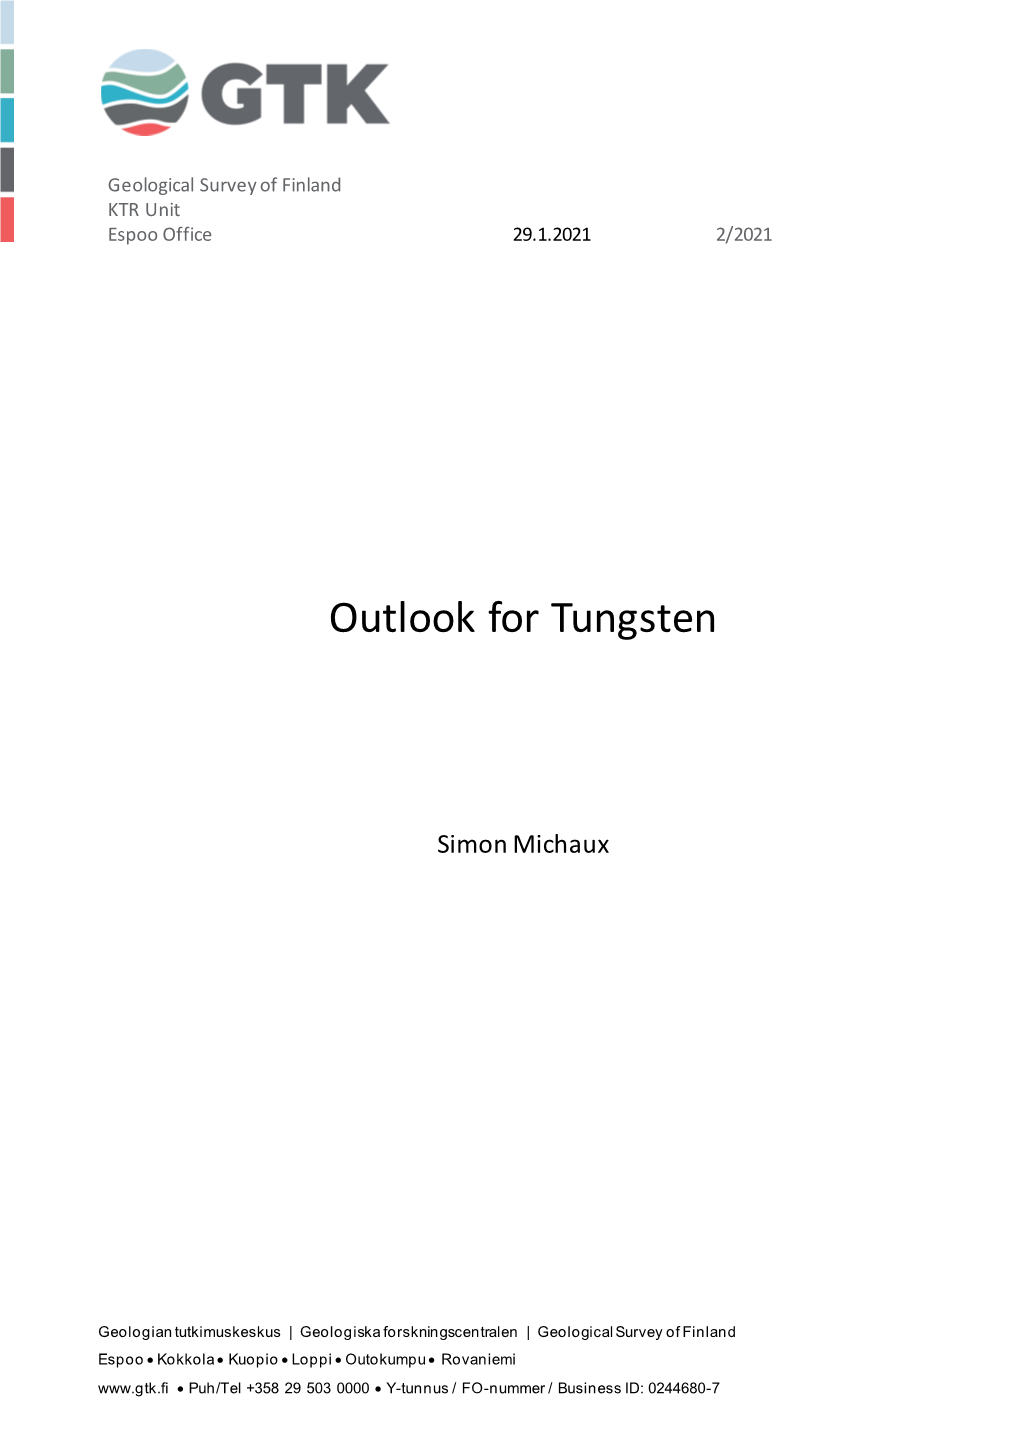 Outlook for Tungsten